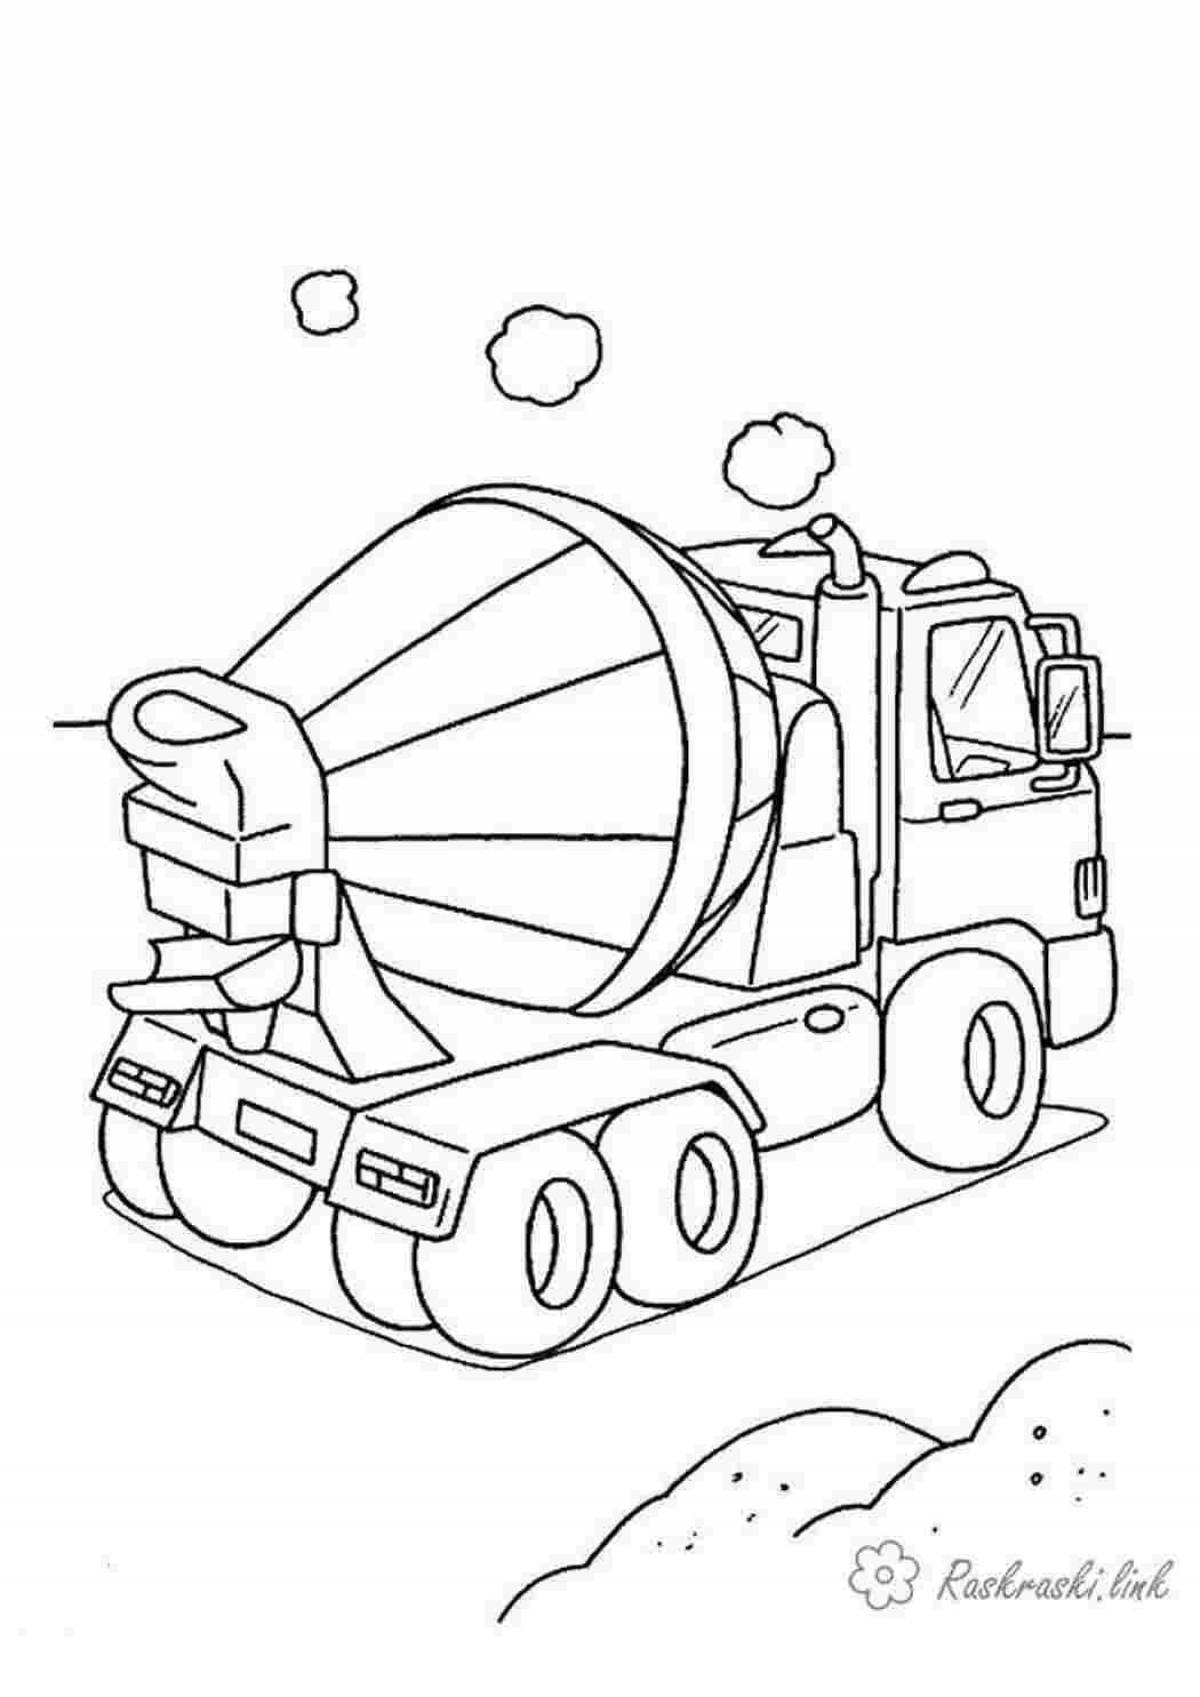 Coloring book outstanding cement truck